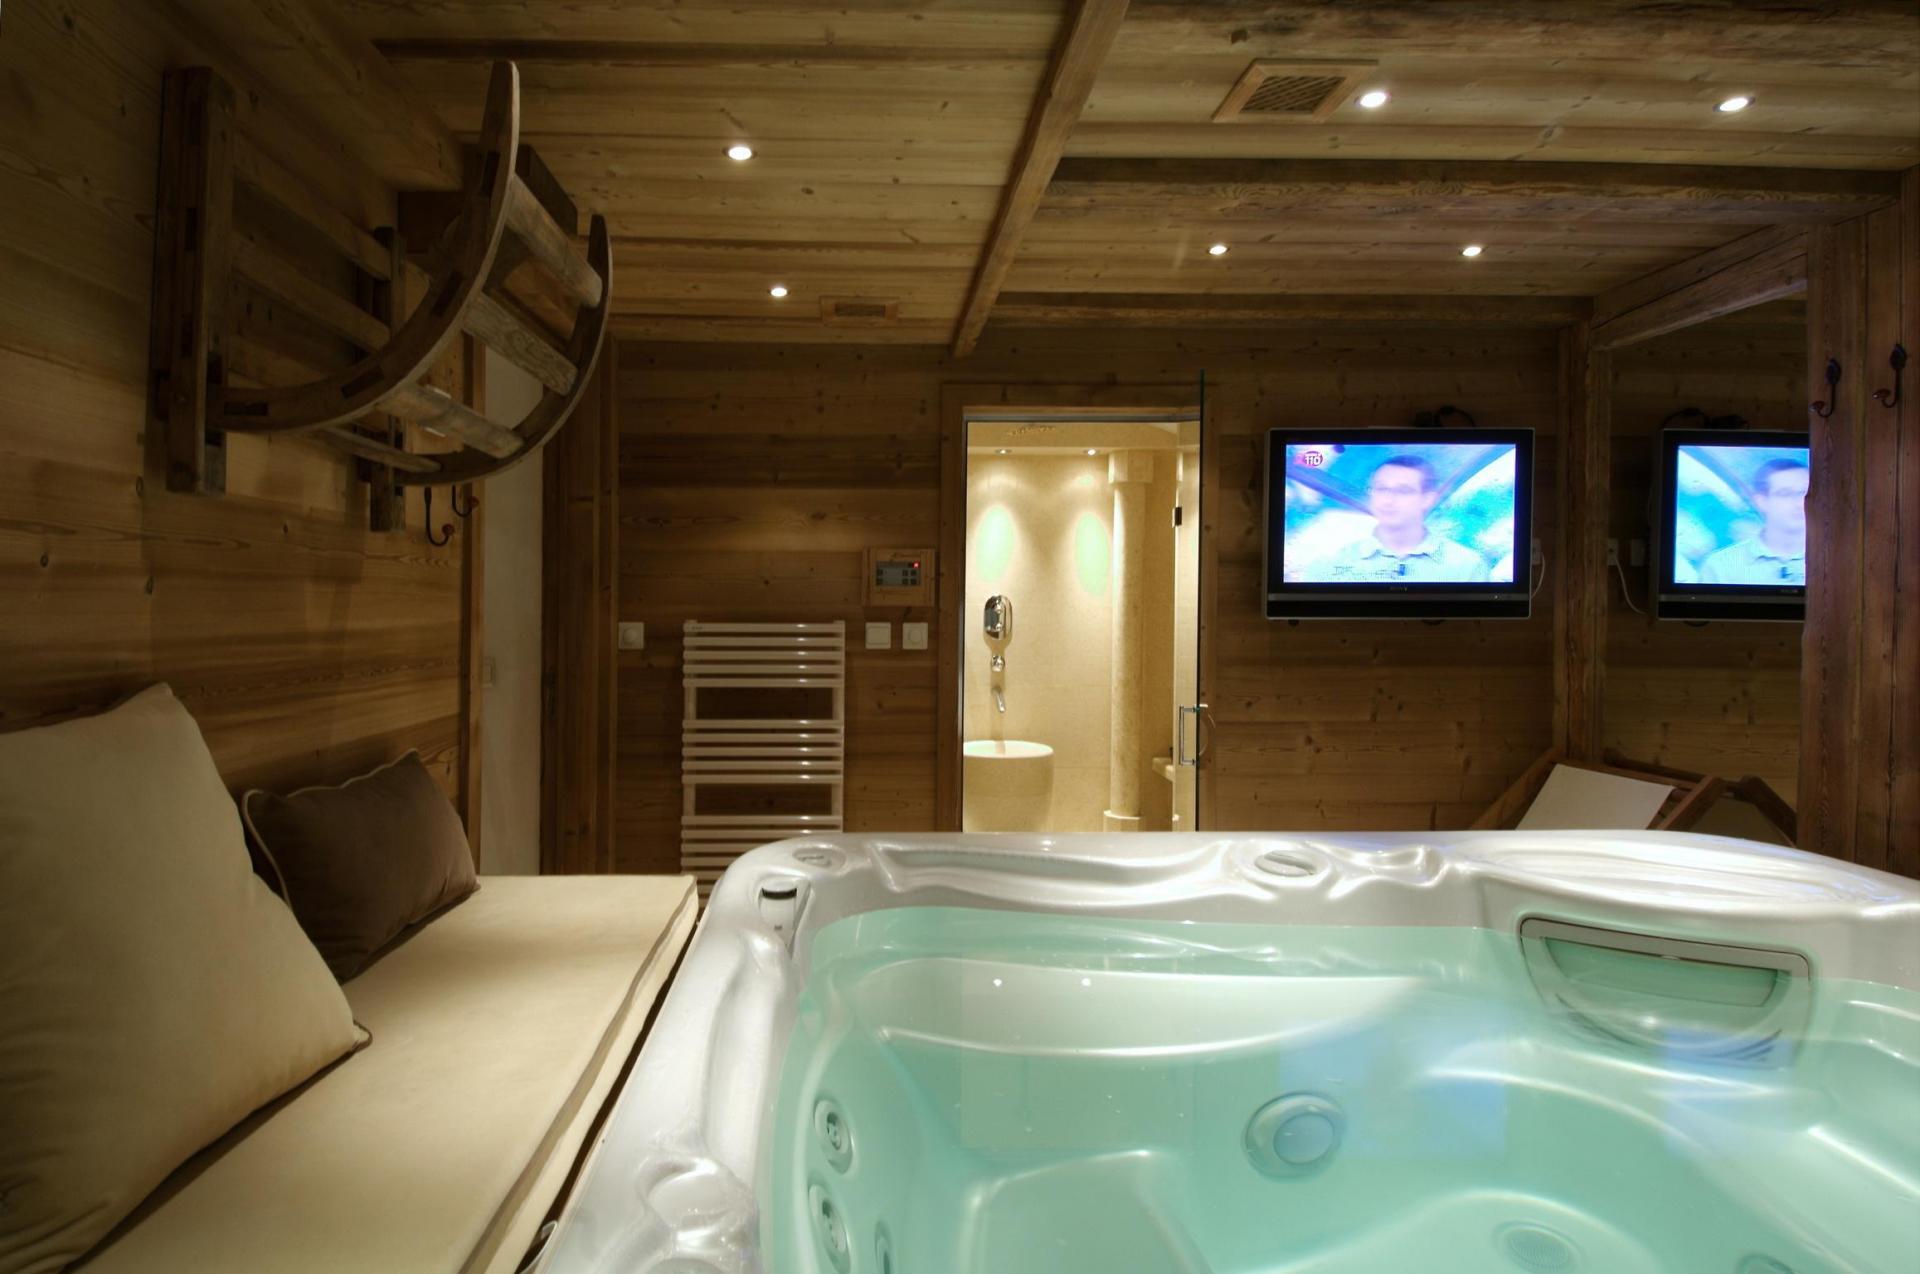 THE INSIDE JACUZZI ... ALL IS THOUGHT TO HAVE AN UNFORGETTABLE HOLIDAY